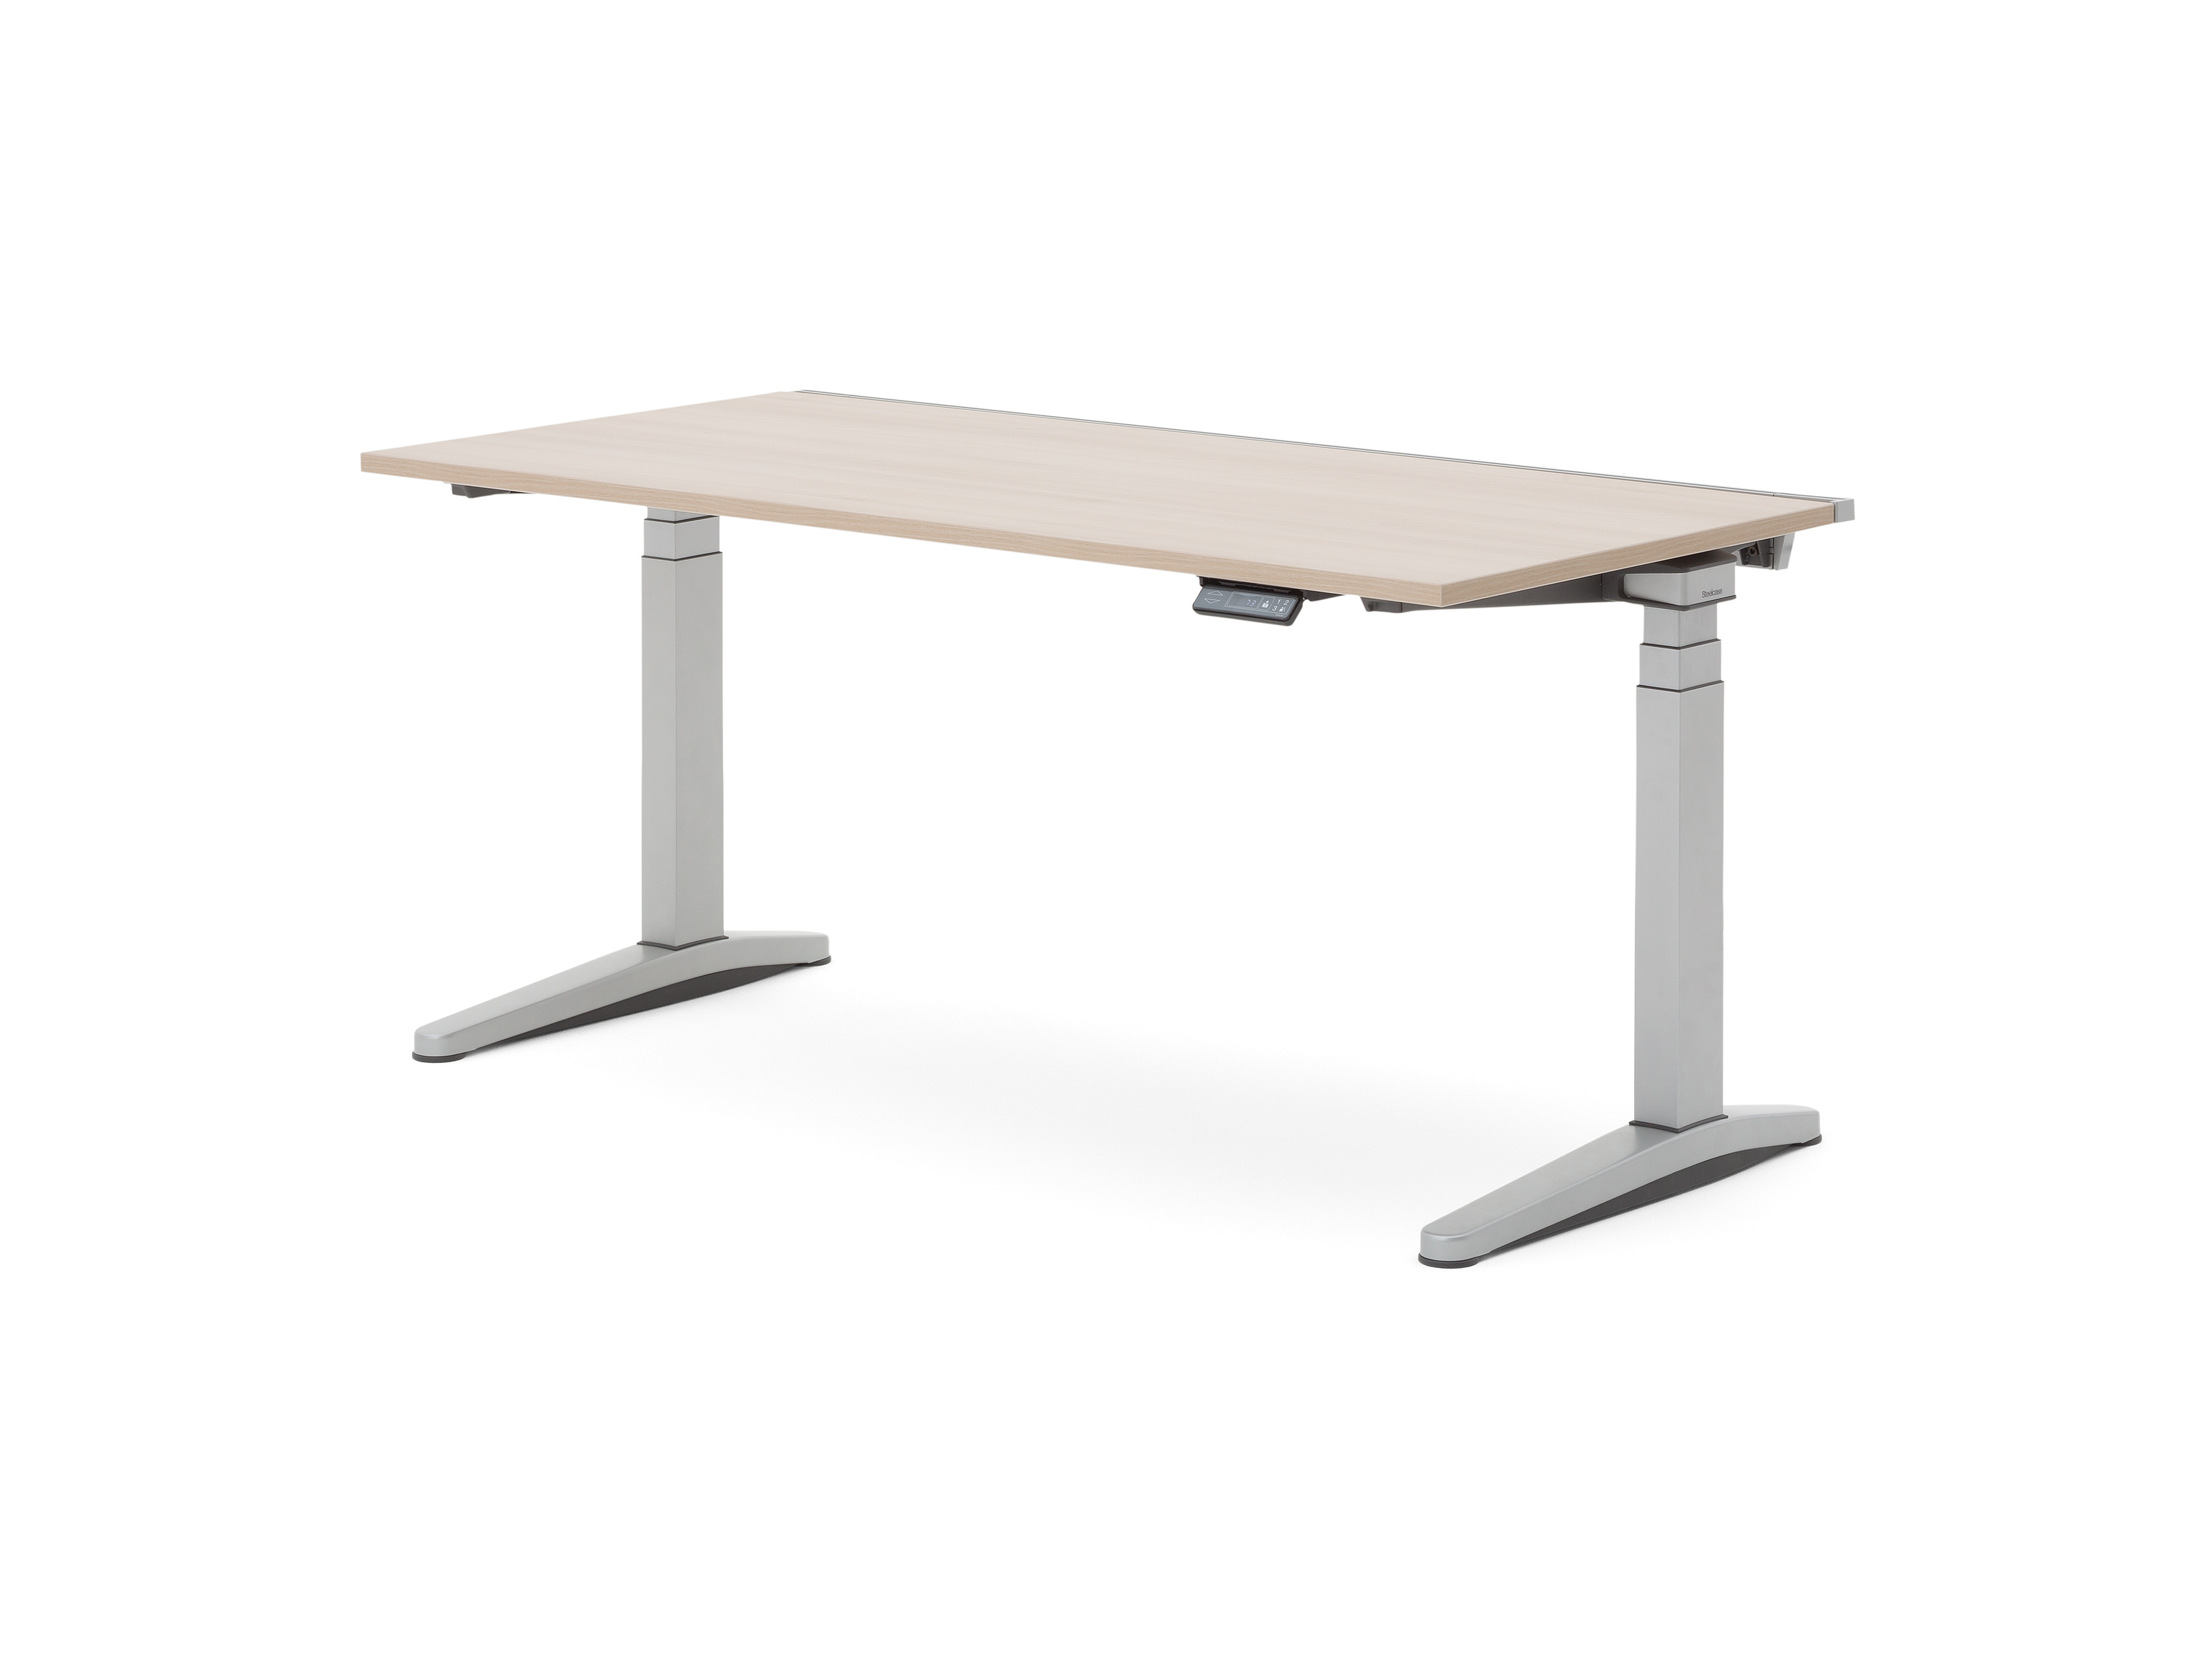 Ohio Desk We Make It Easy Office Furniture Office Solutions